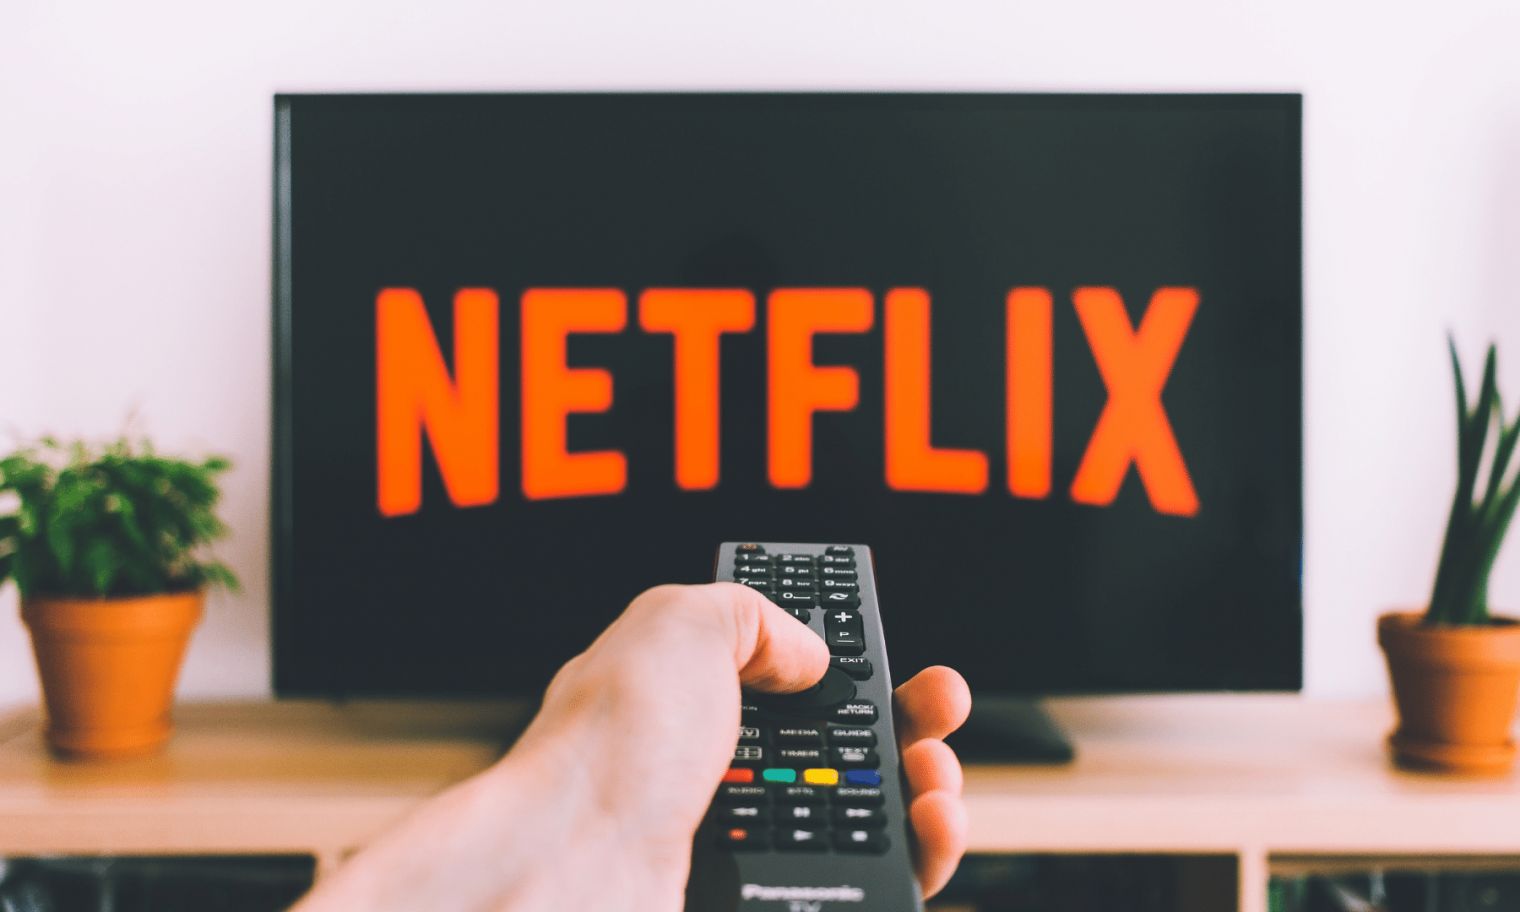 How To Log Out Of Netflix On LG Smart TV